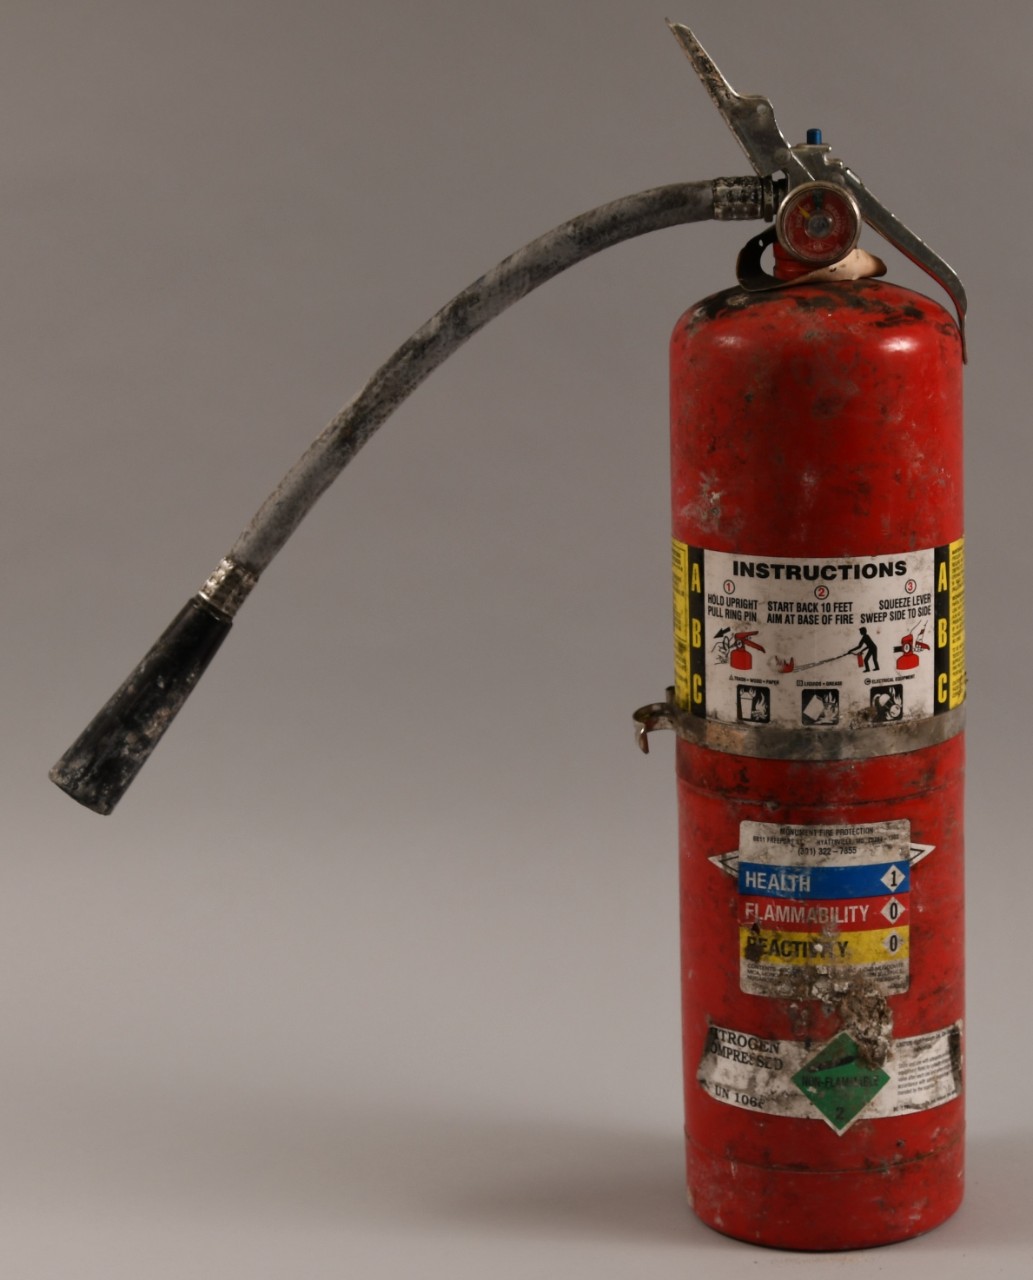 Reverse side of red fire extinguisher, hose extended to the left. Red pressuse gauge at top indicates it needs to be recharged.